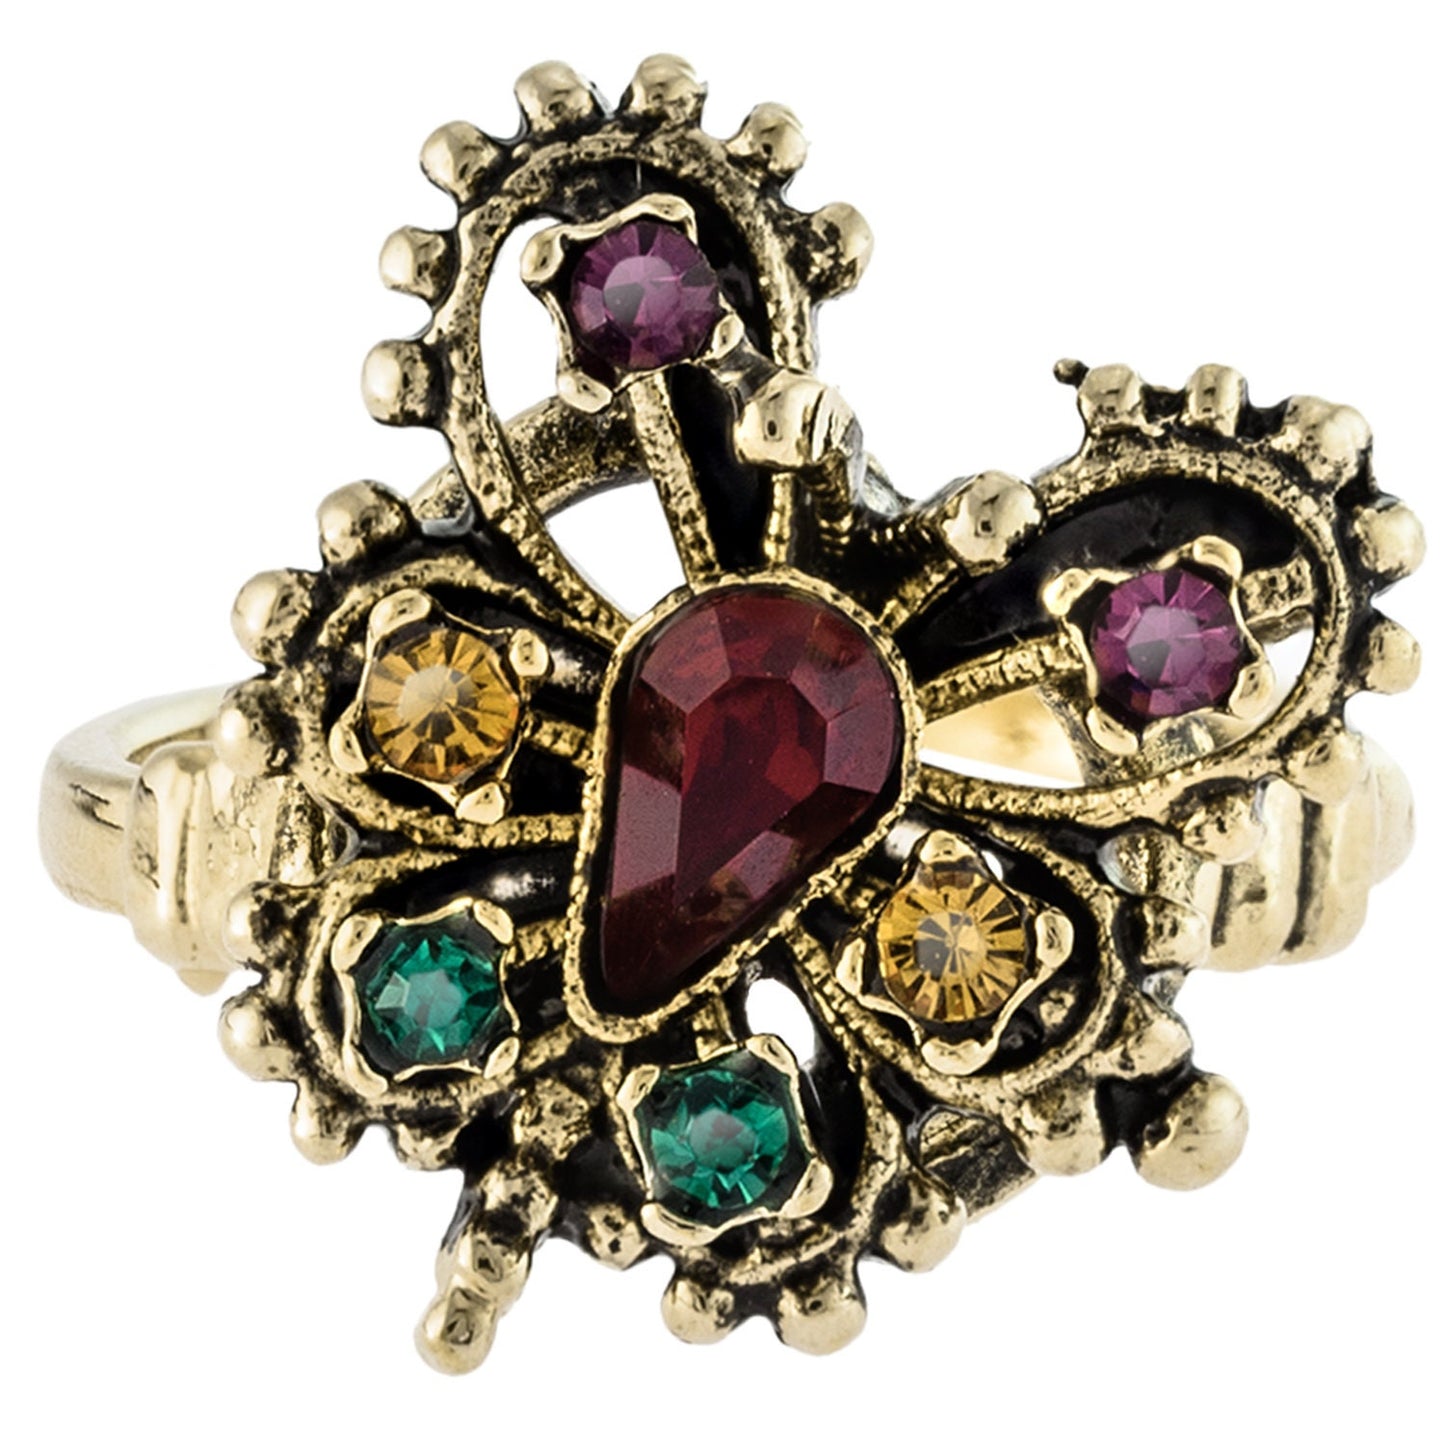 Vintage Ring Butterfly Ring Multi Colors of Swarovski Crystals 18kt Gold Womans Jewelry #R104 - Limited Stock - Never Worn